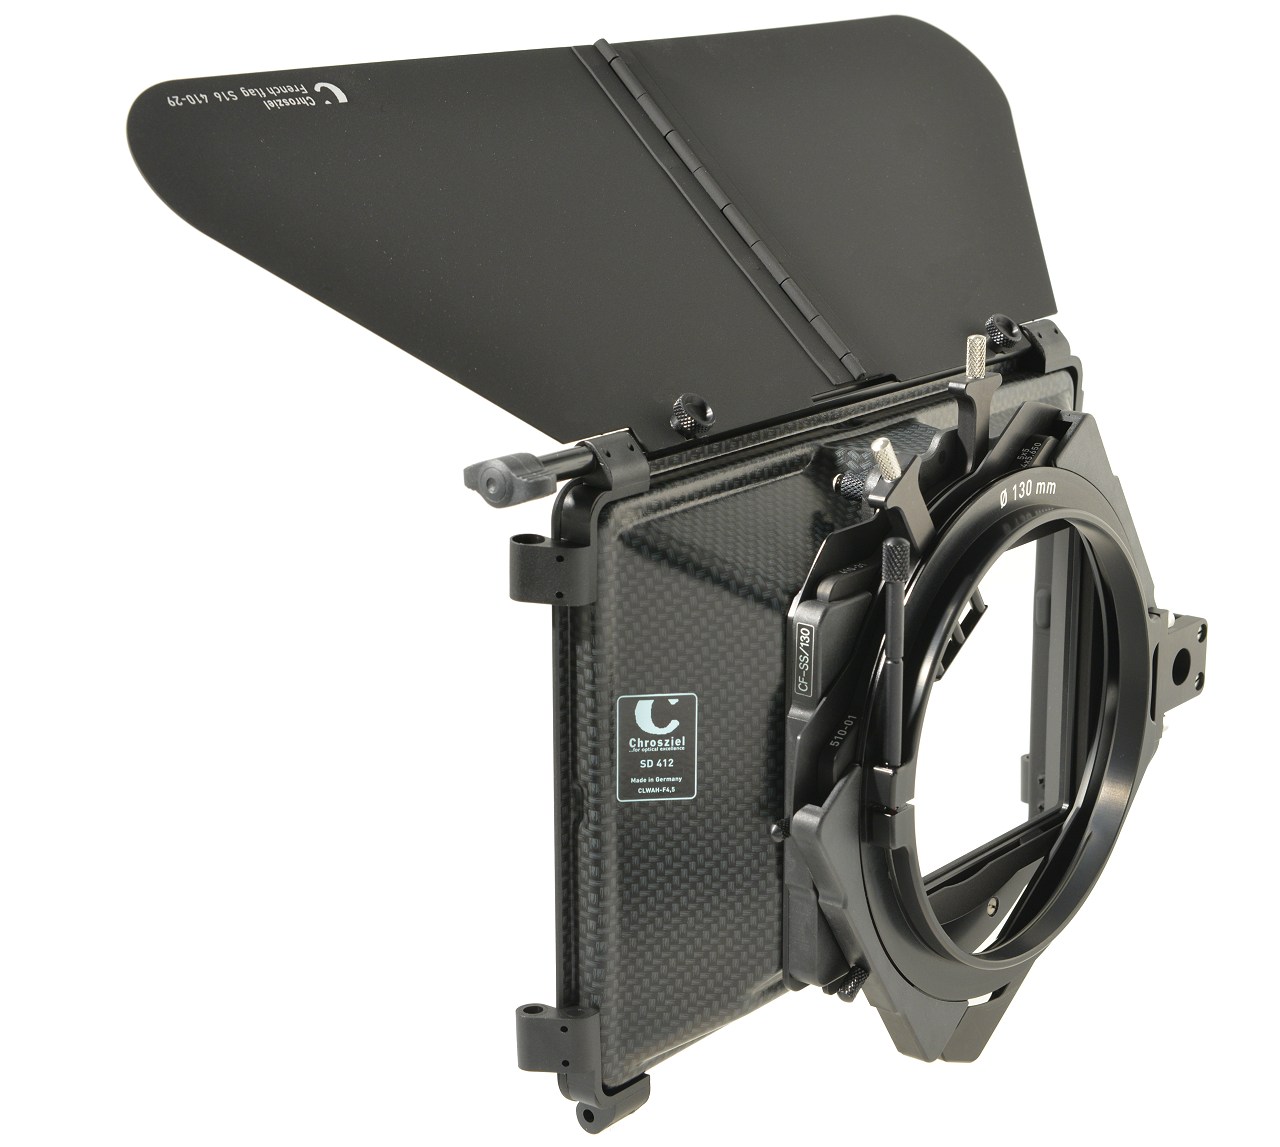 Clamp On Matte Box SD 412 Sunshade 130mm, complete